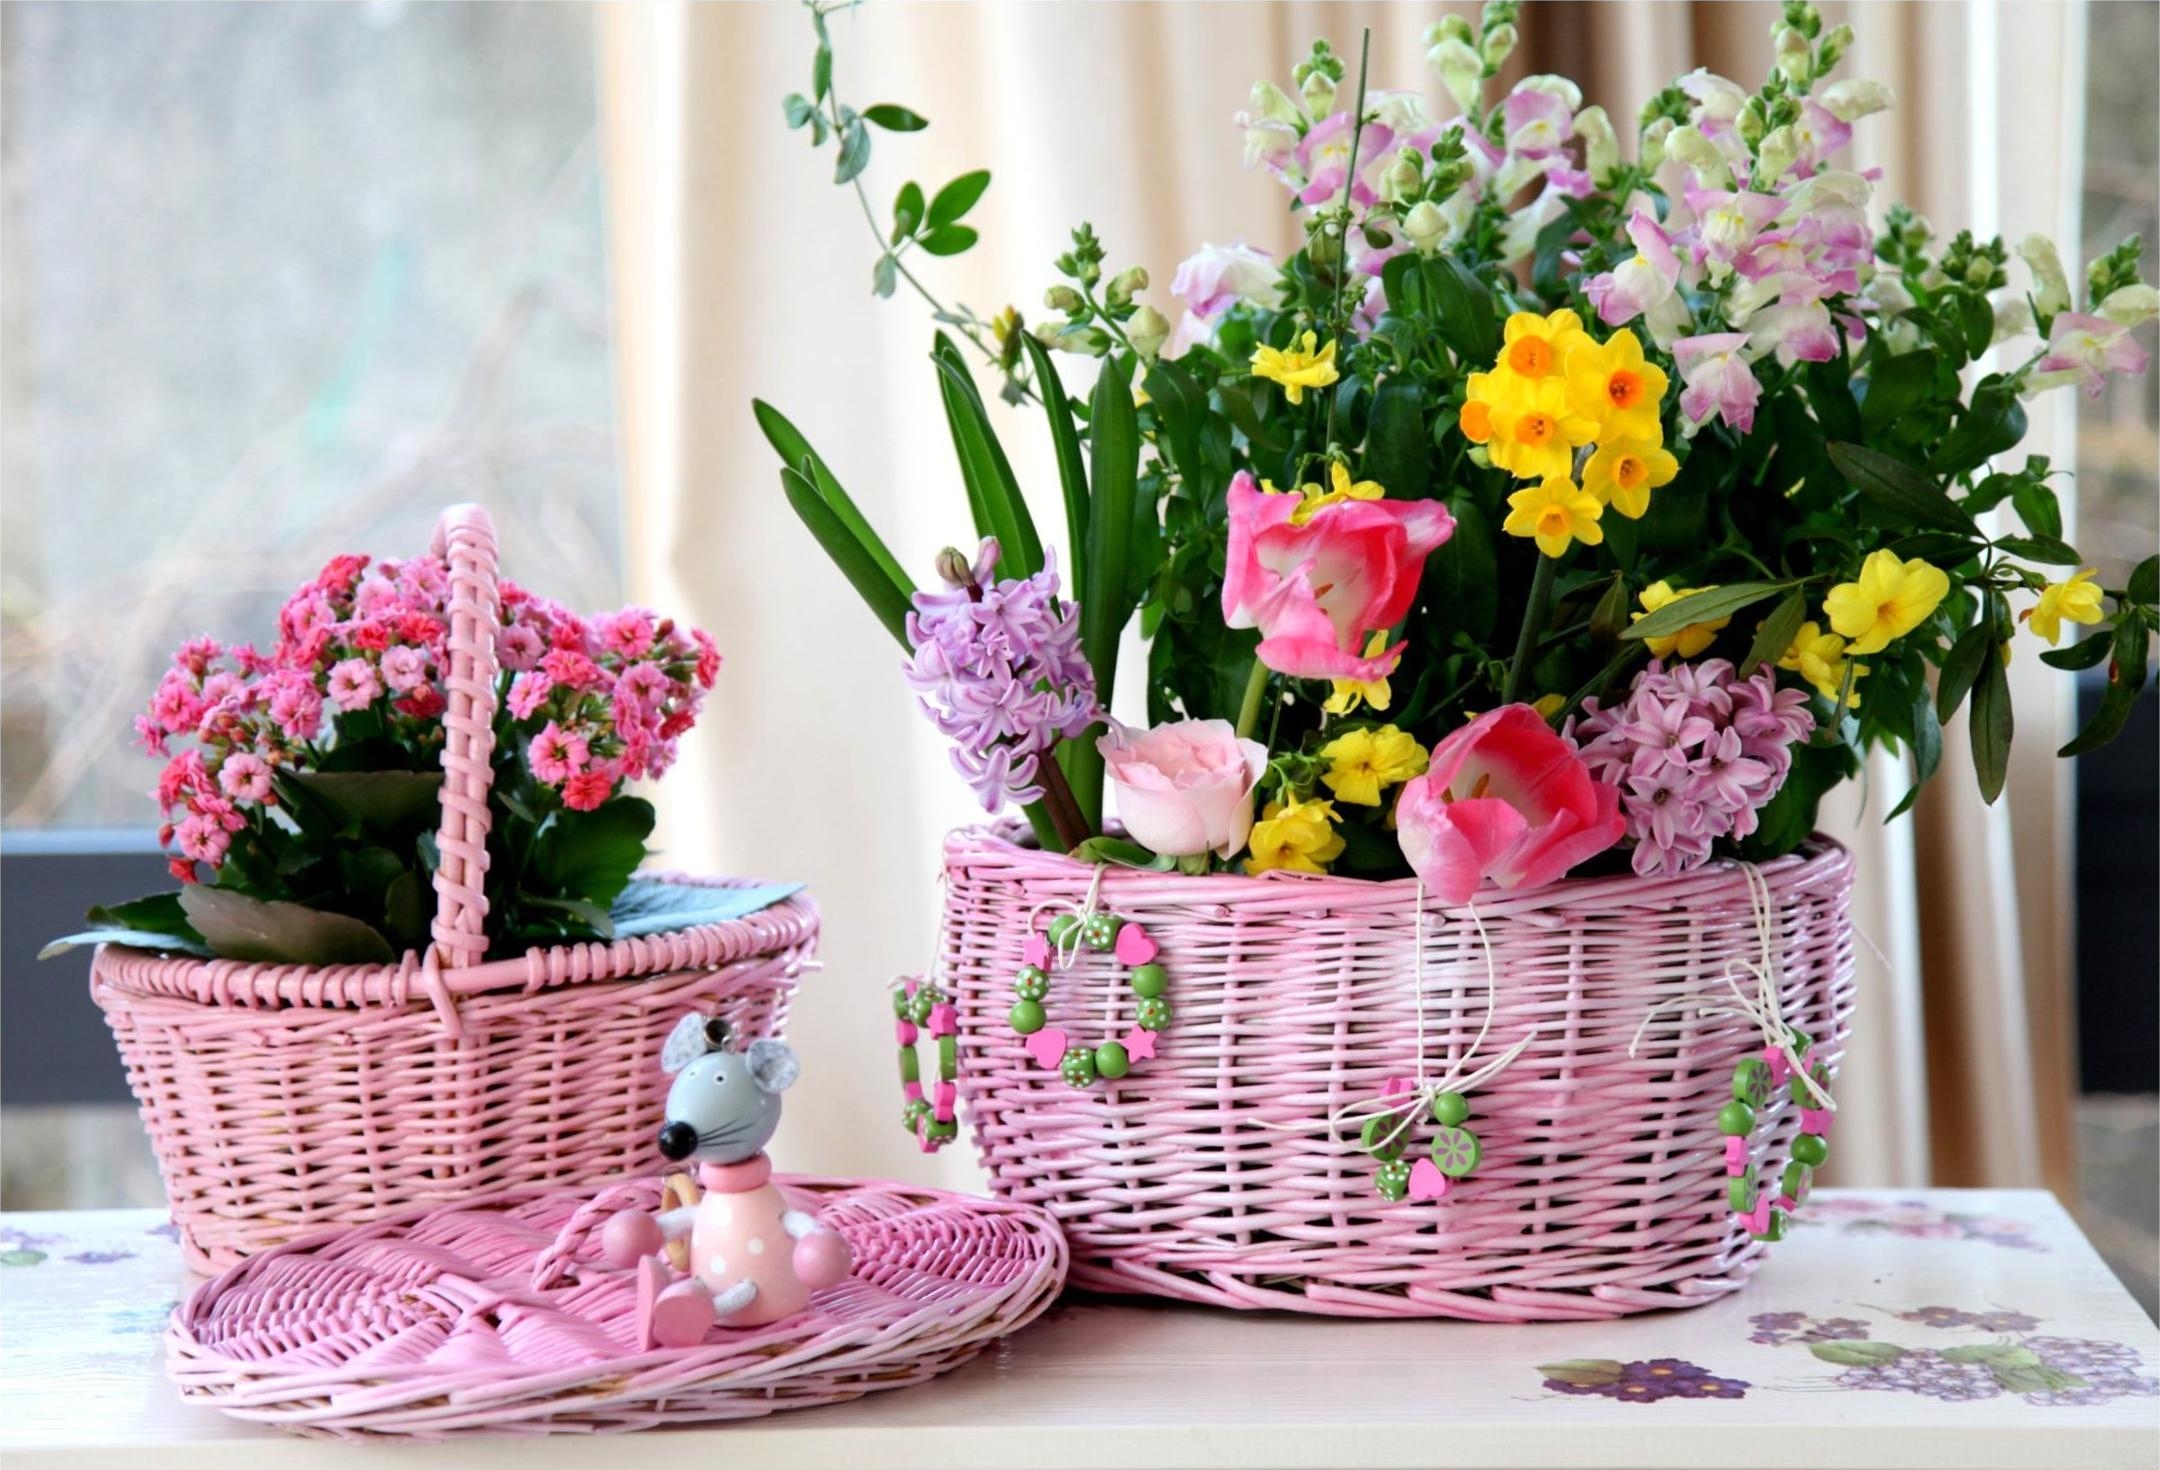 rose flower, flowers, tulips, narcissussi, rose, mouse, basket, hyacinths, baskets, freesia